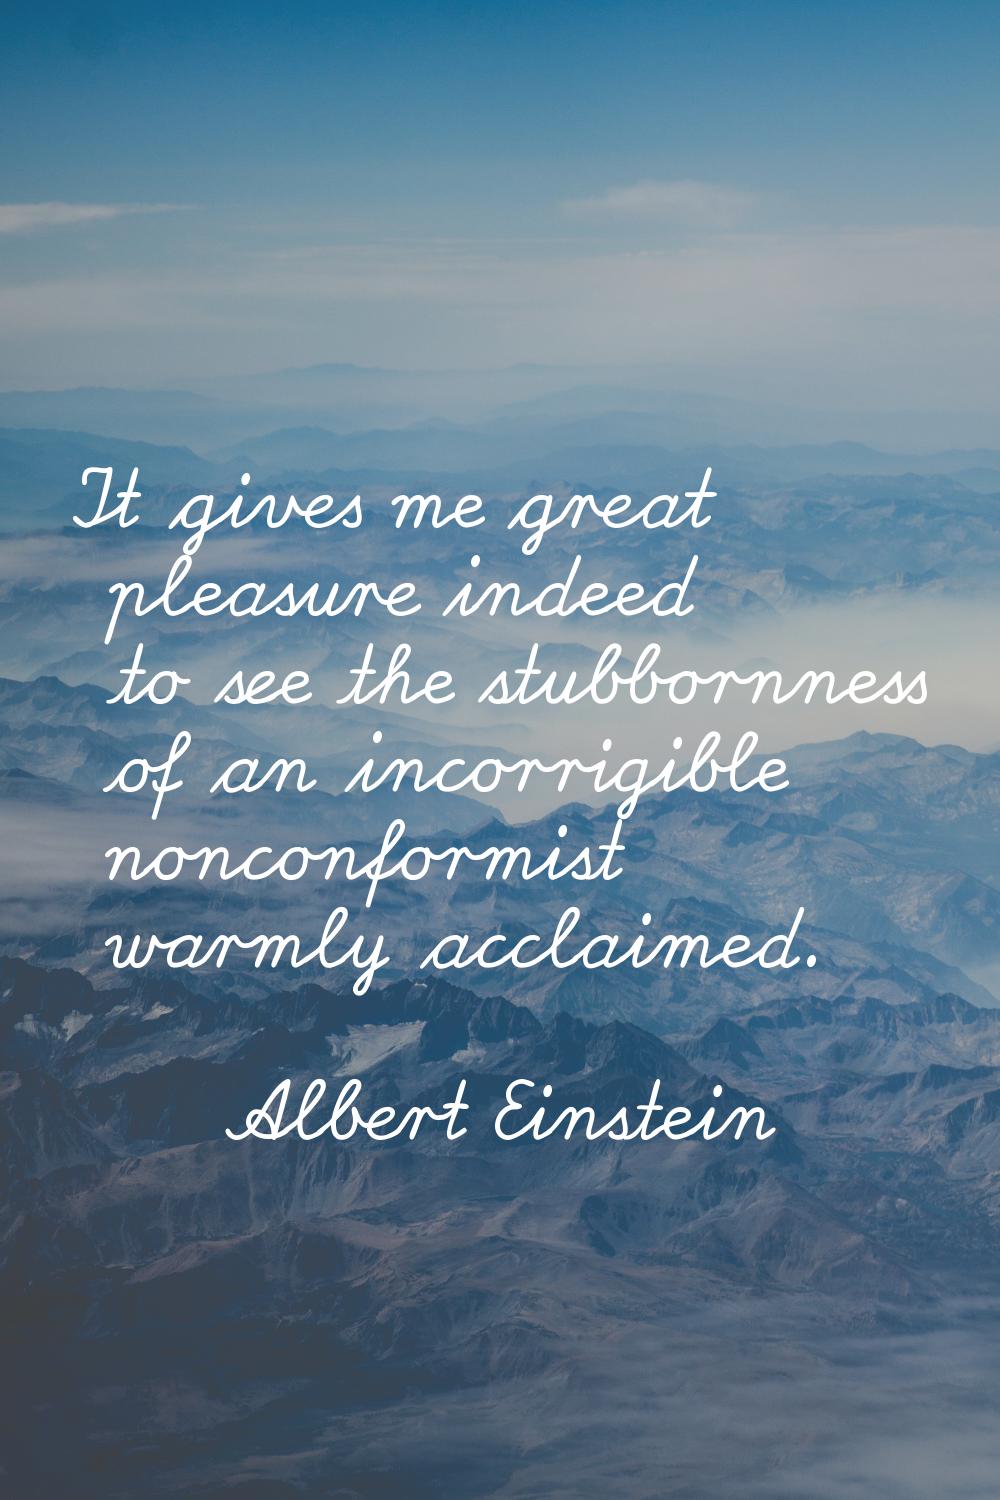 It gives me great pleasure indeed to see the stubbornness of an incorrigible nonconformist warmly a